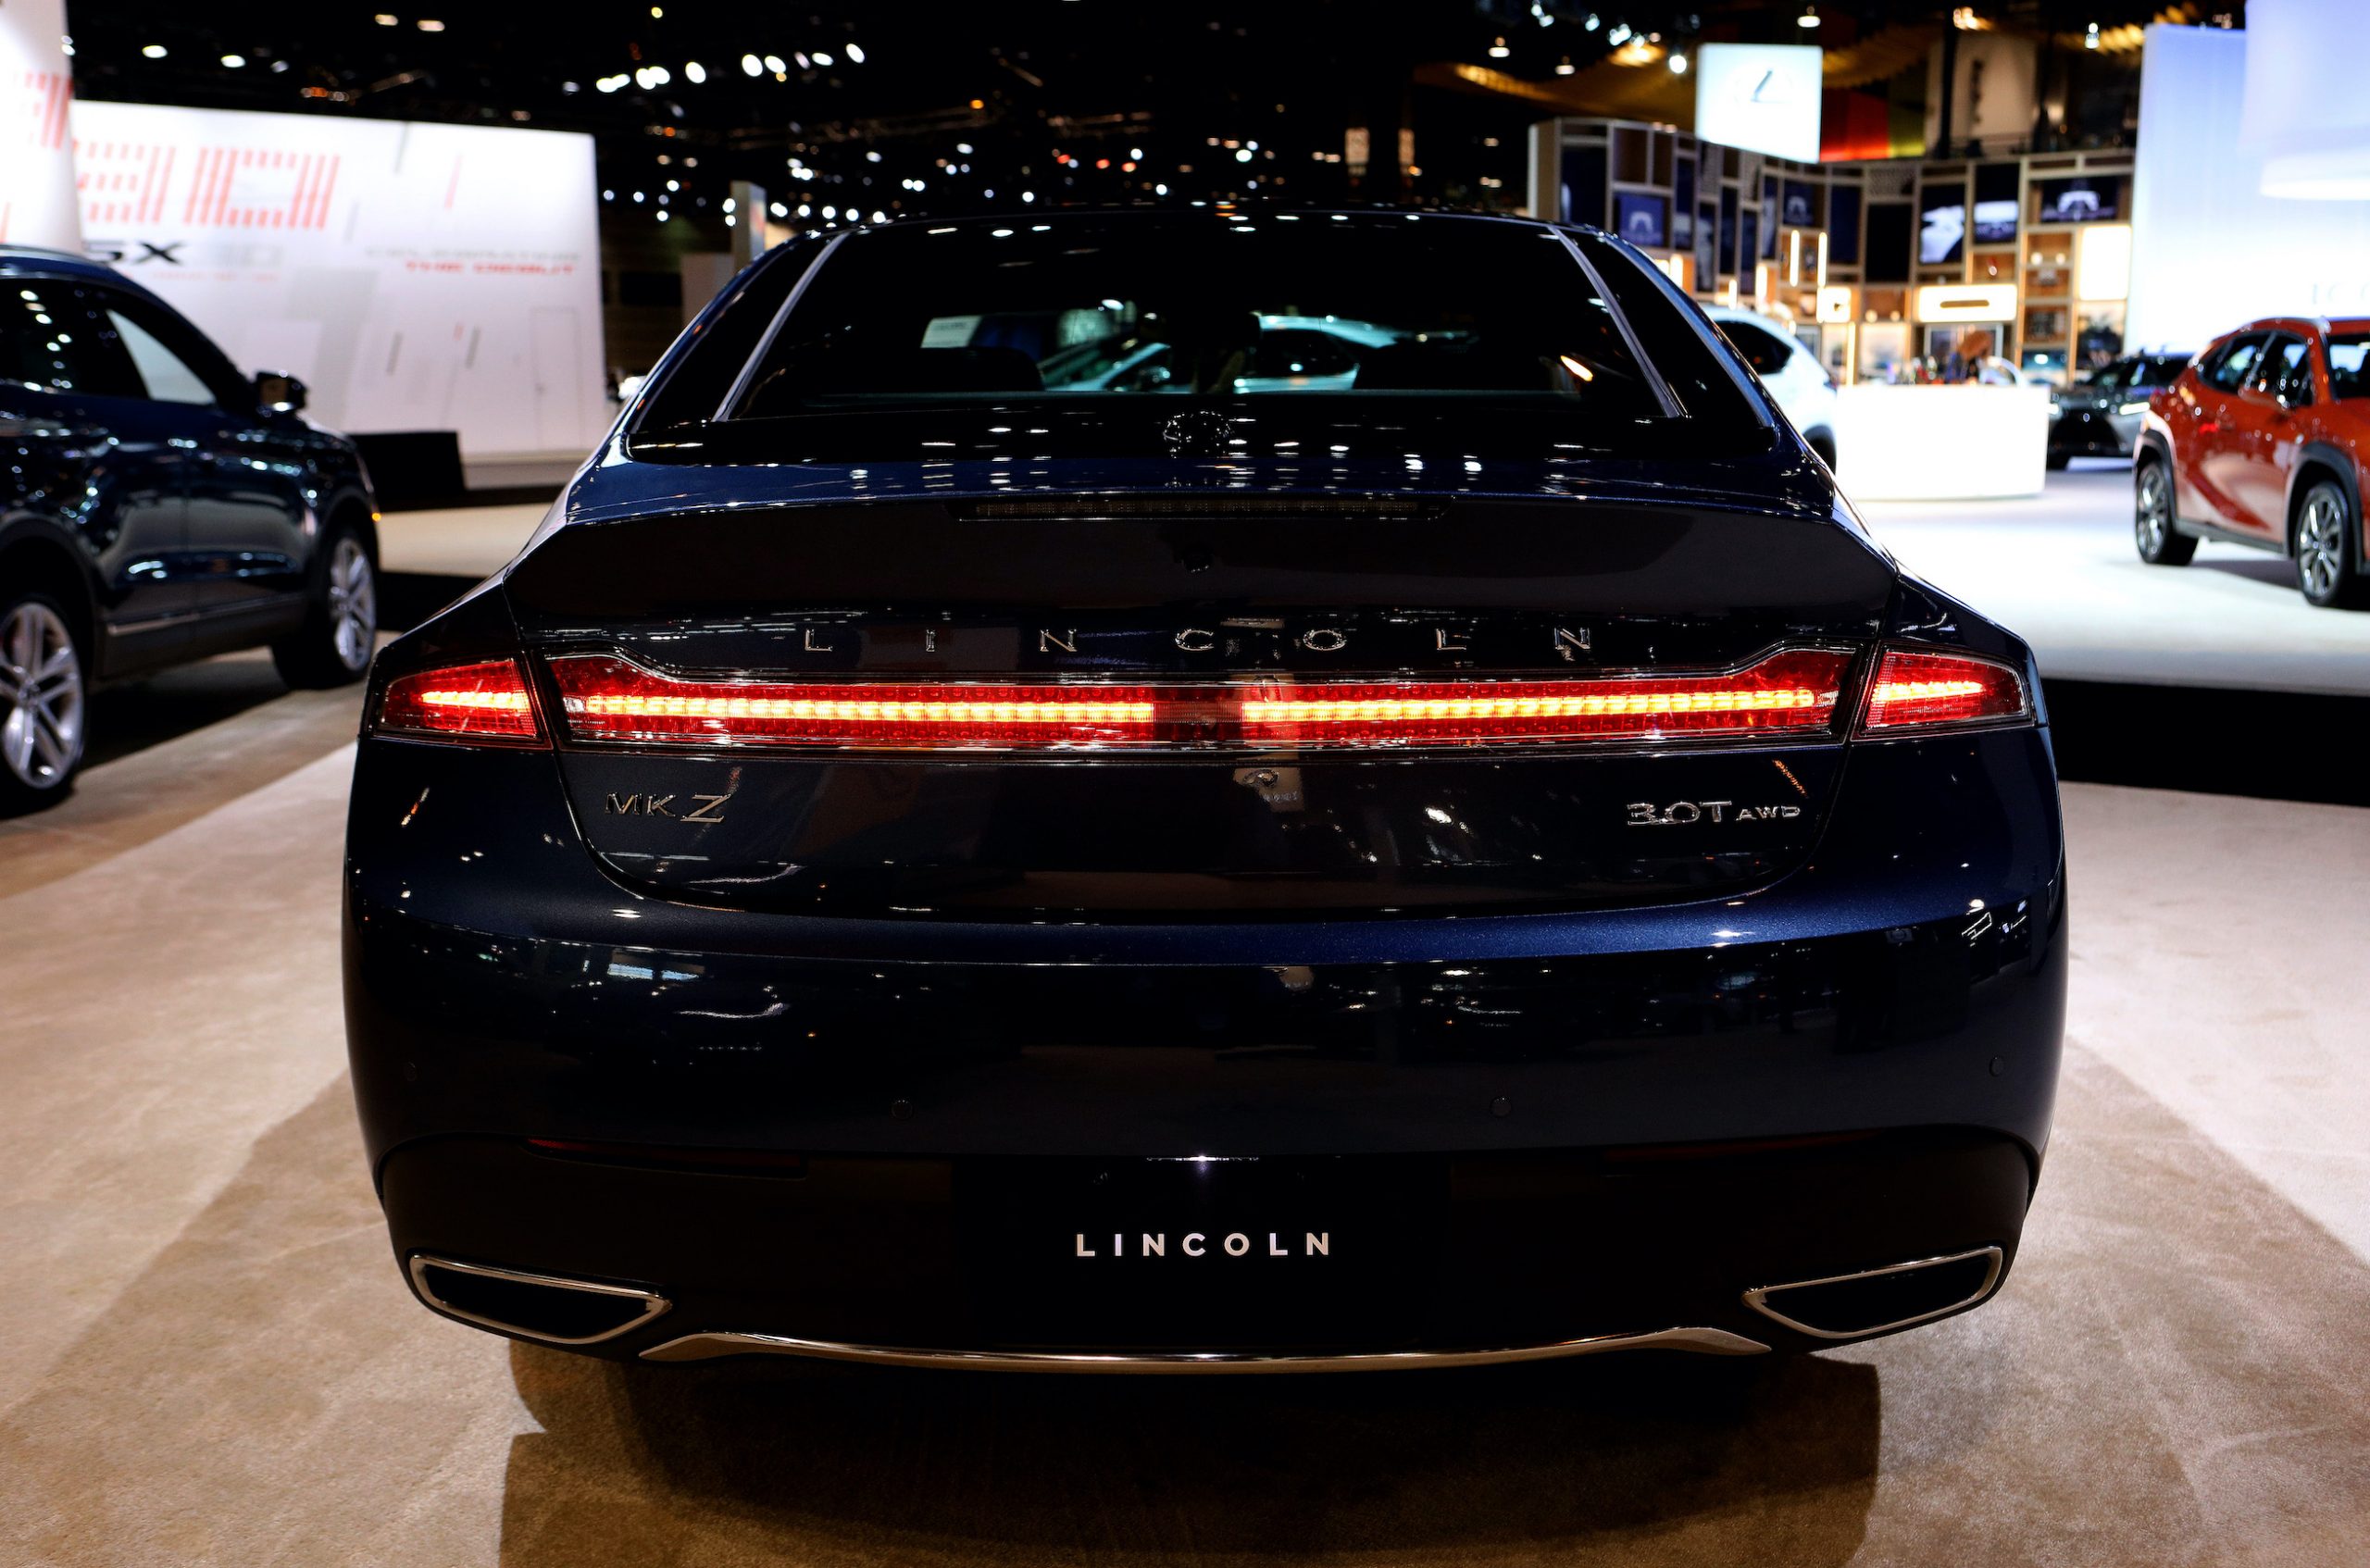 2019 Lincoln MKZ is on display at the 111th Annual Chicago Auto Show